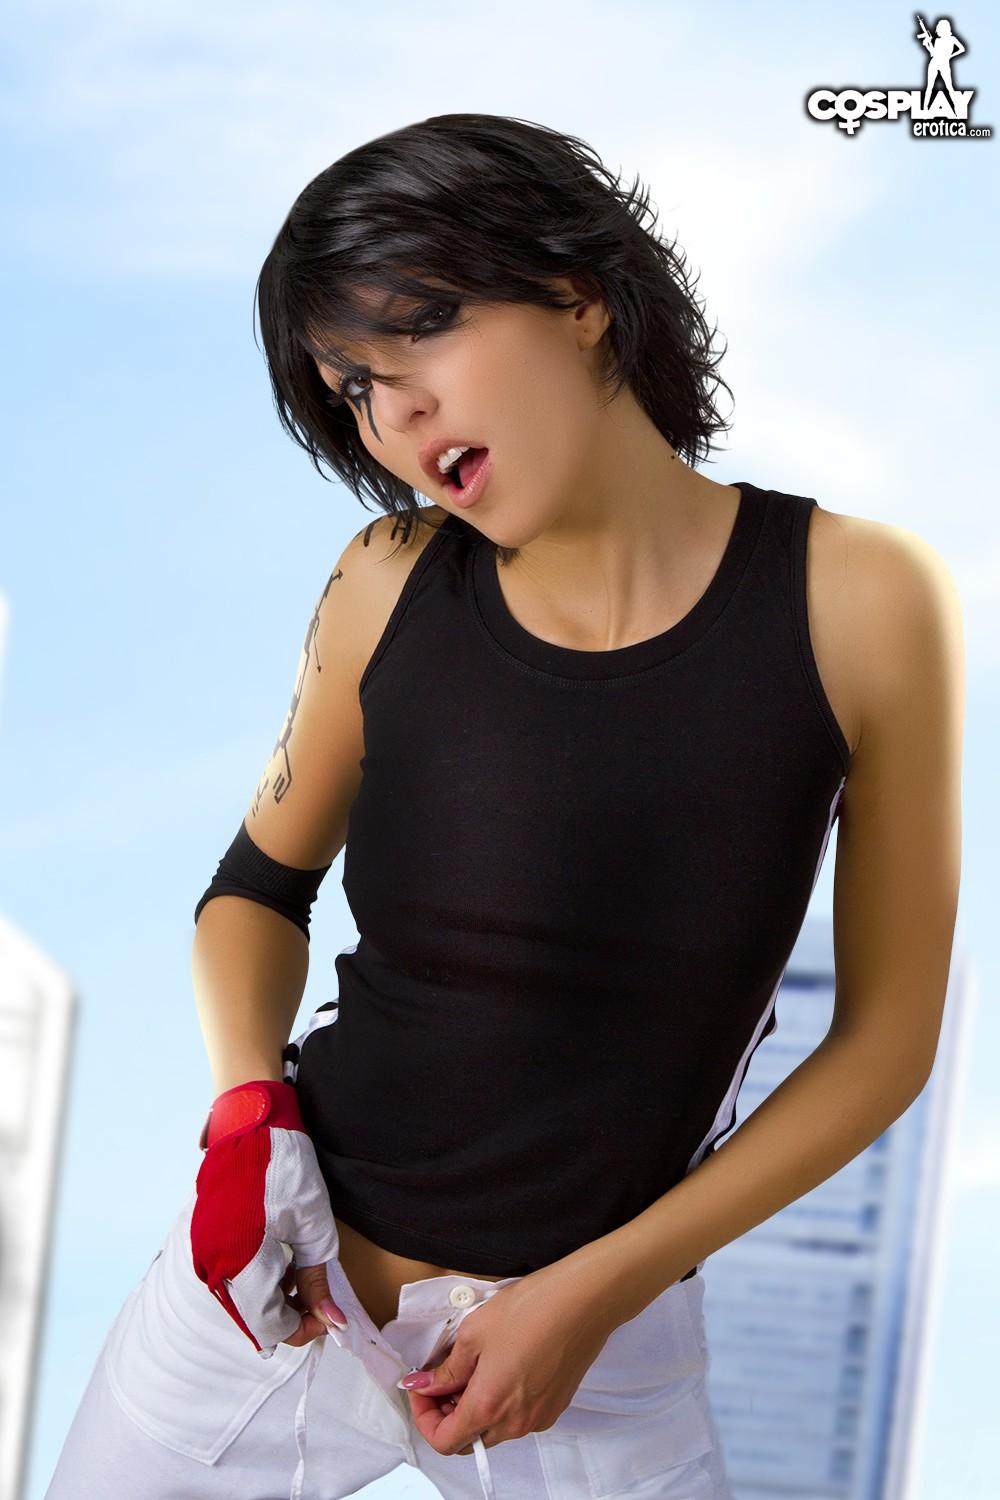 Sexy cosplay girl Anne poses as Faith from Mirror's Edge #53248683